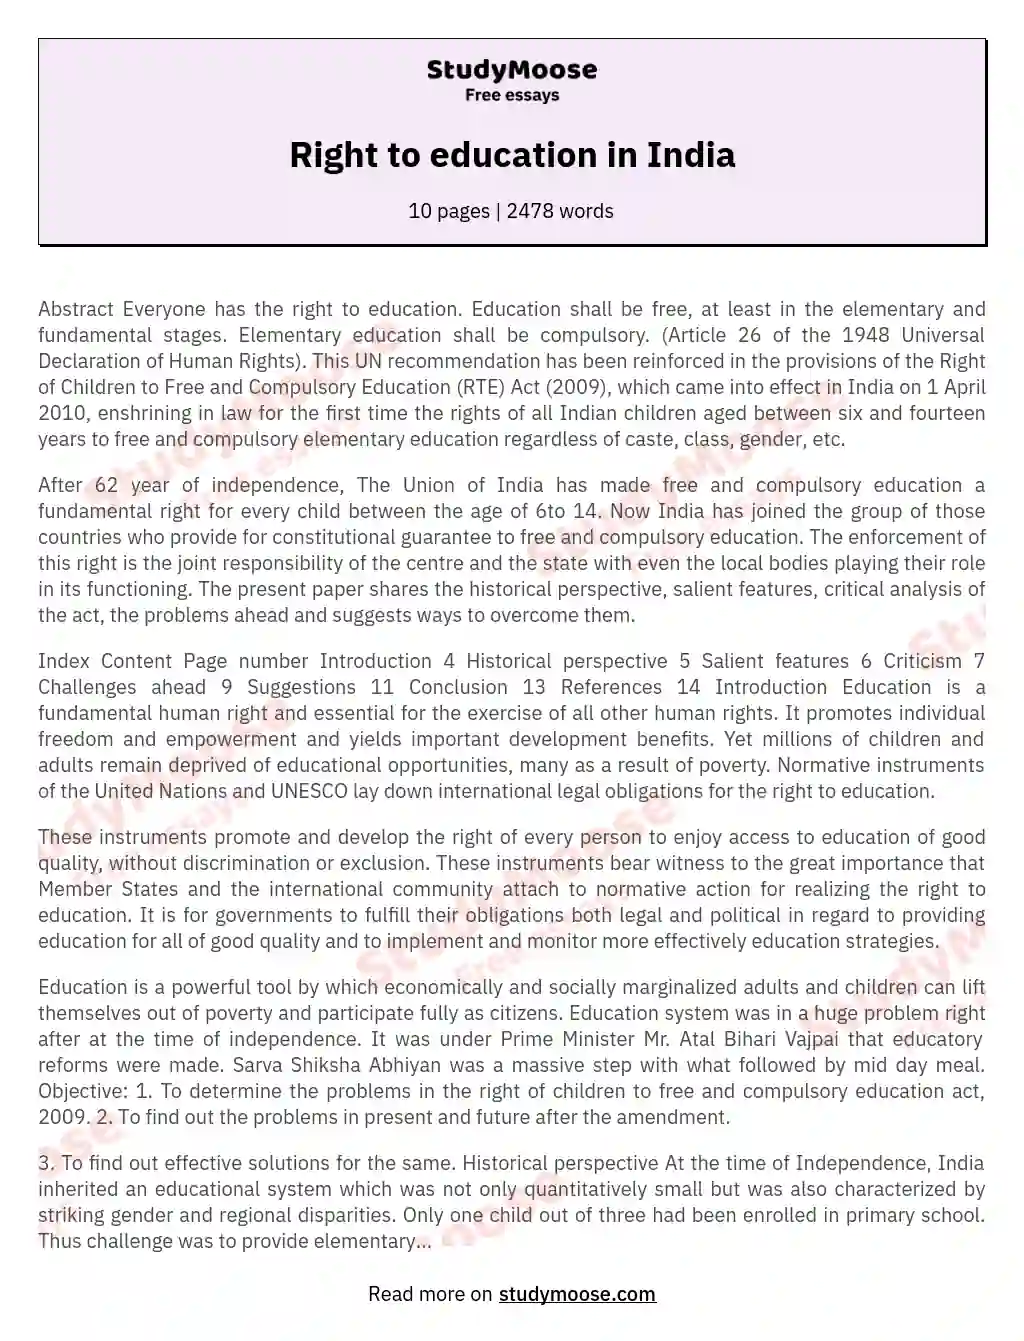 Right to education in India essay